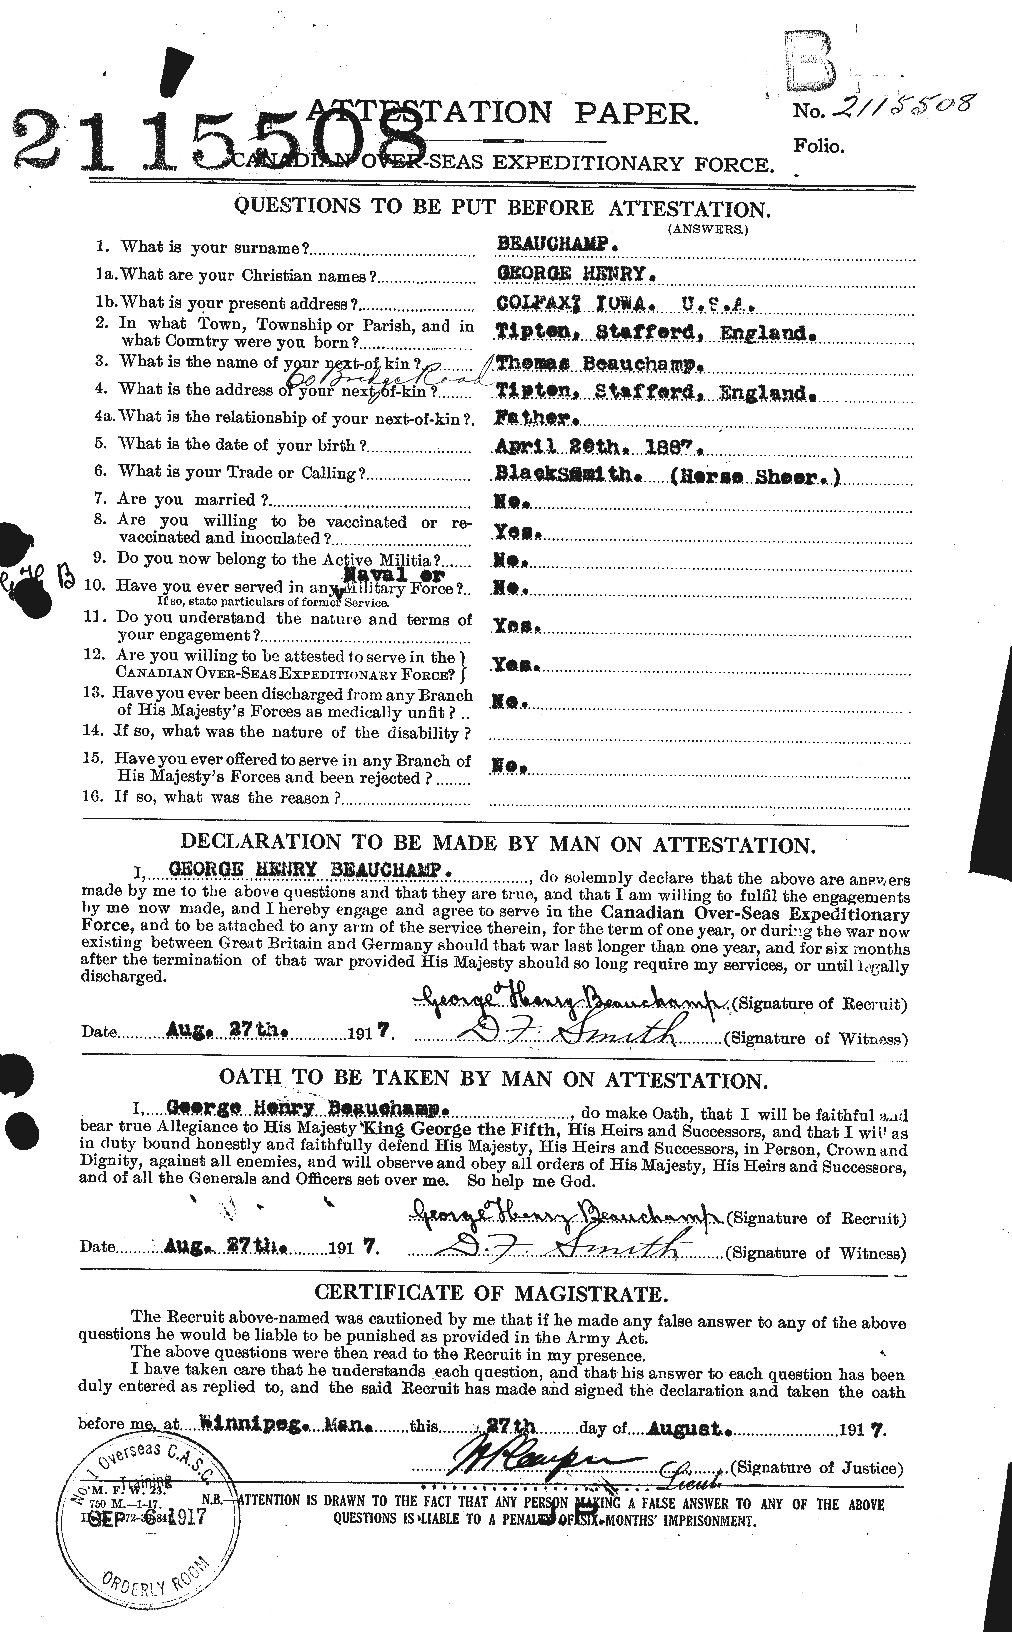 Personnel Records of the First World War - CEF 230971a